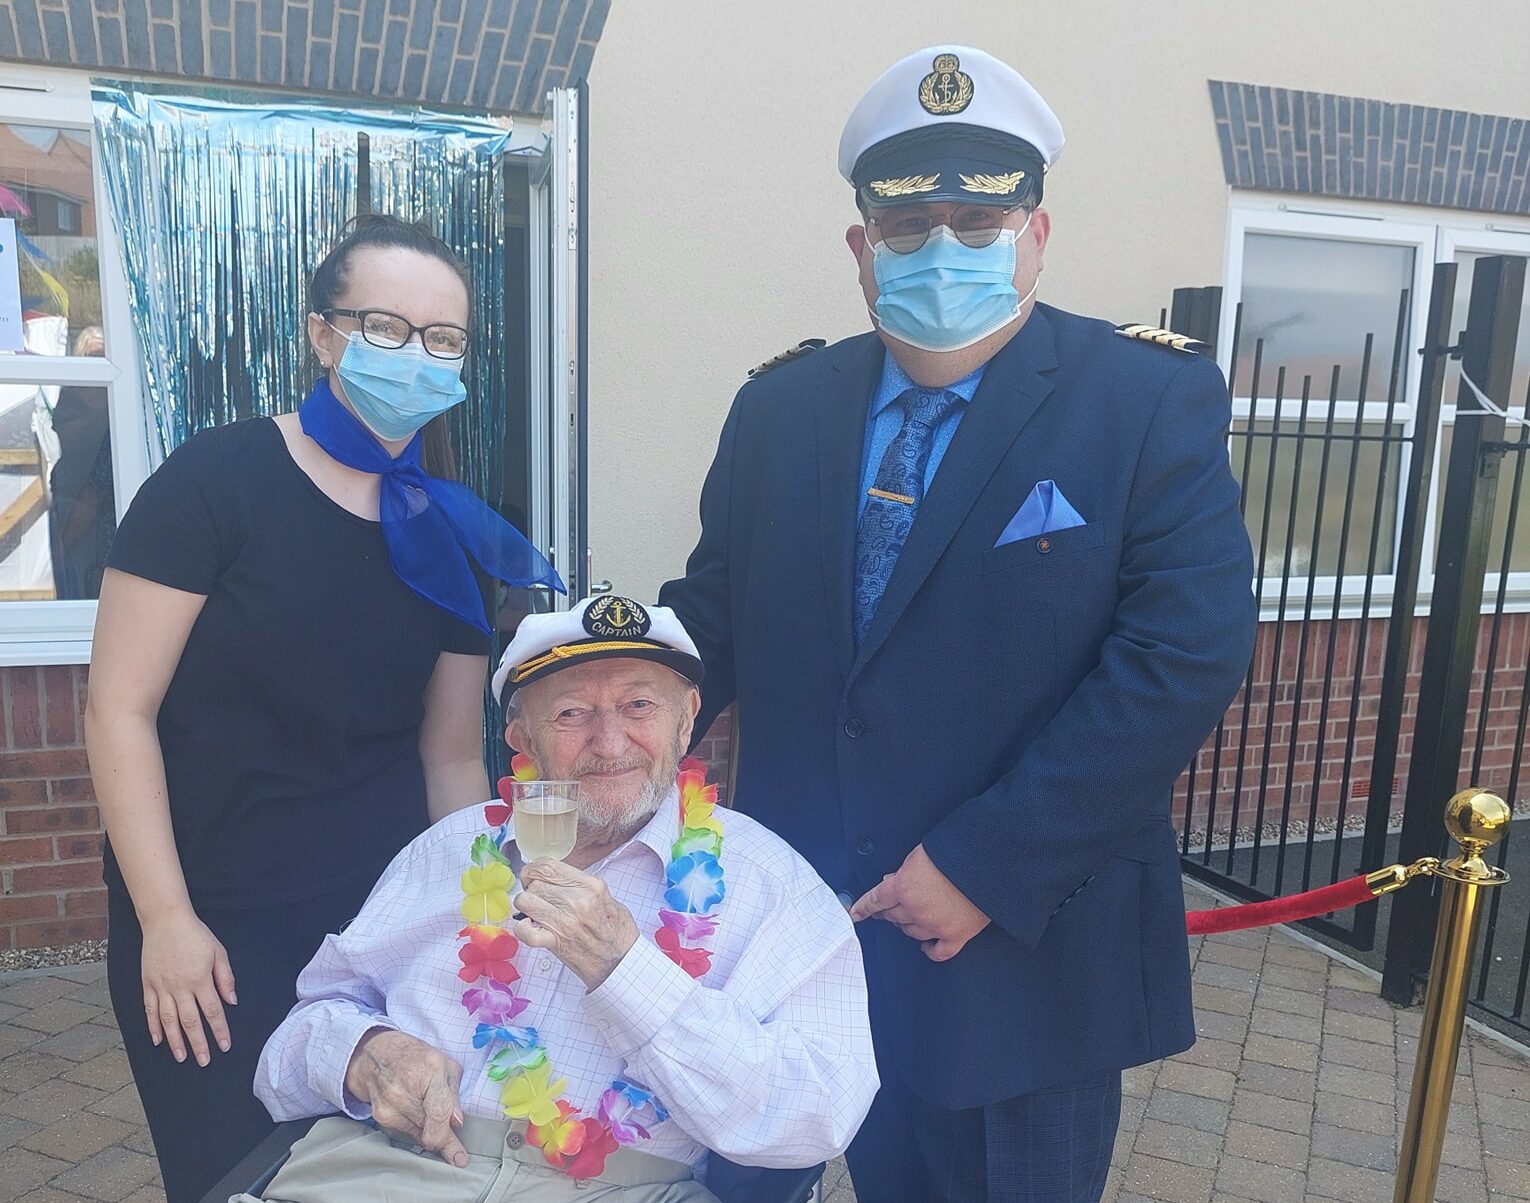 Residents at Sedgley Court care home, located on Brick Kiln Way in Dudley, are once again ready to embark on the luxurious ‘Sedgley Princess Cruise Liner’, thanks to the brilliant care team.